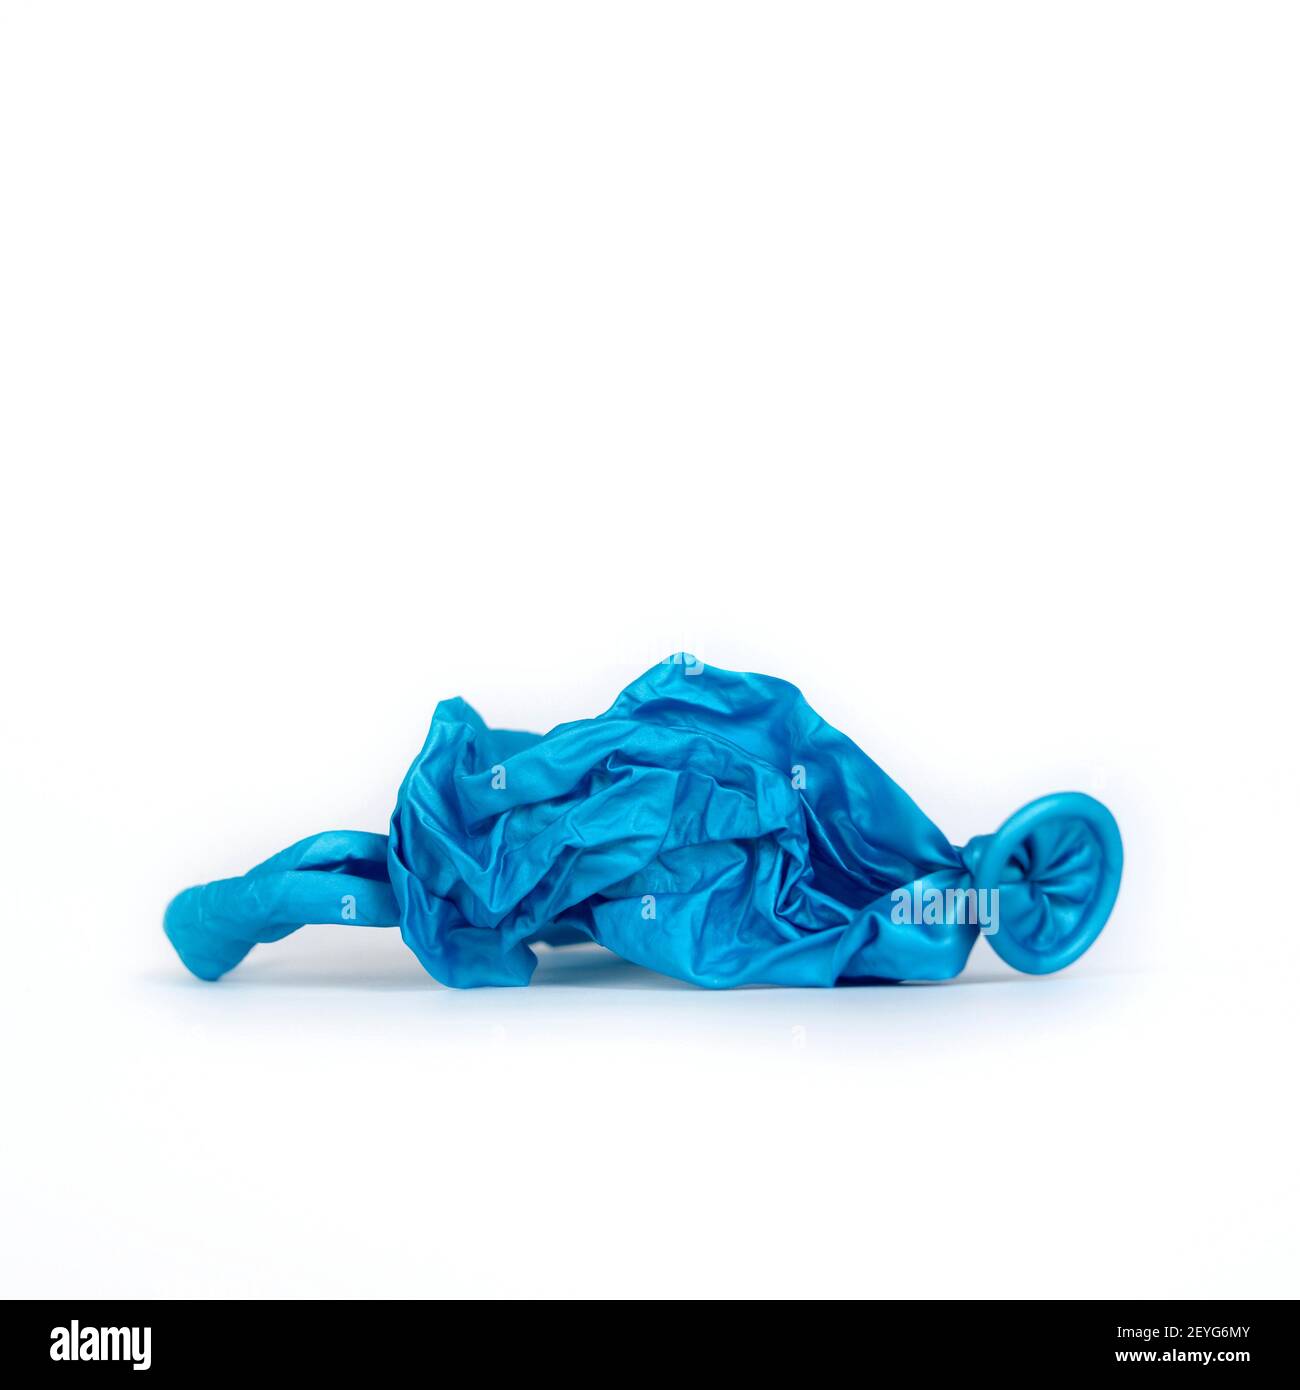 Deflated blue balloons isolated on white background Stock Photo